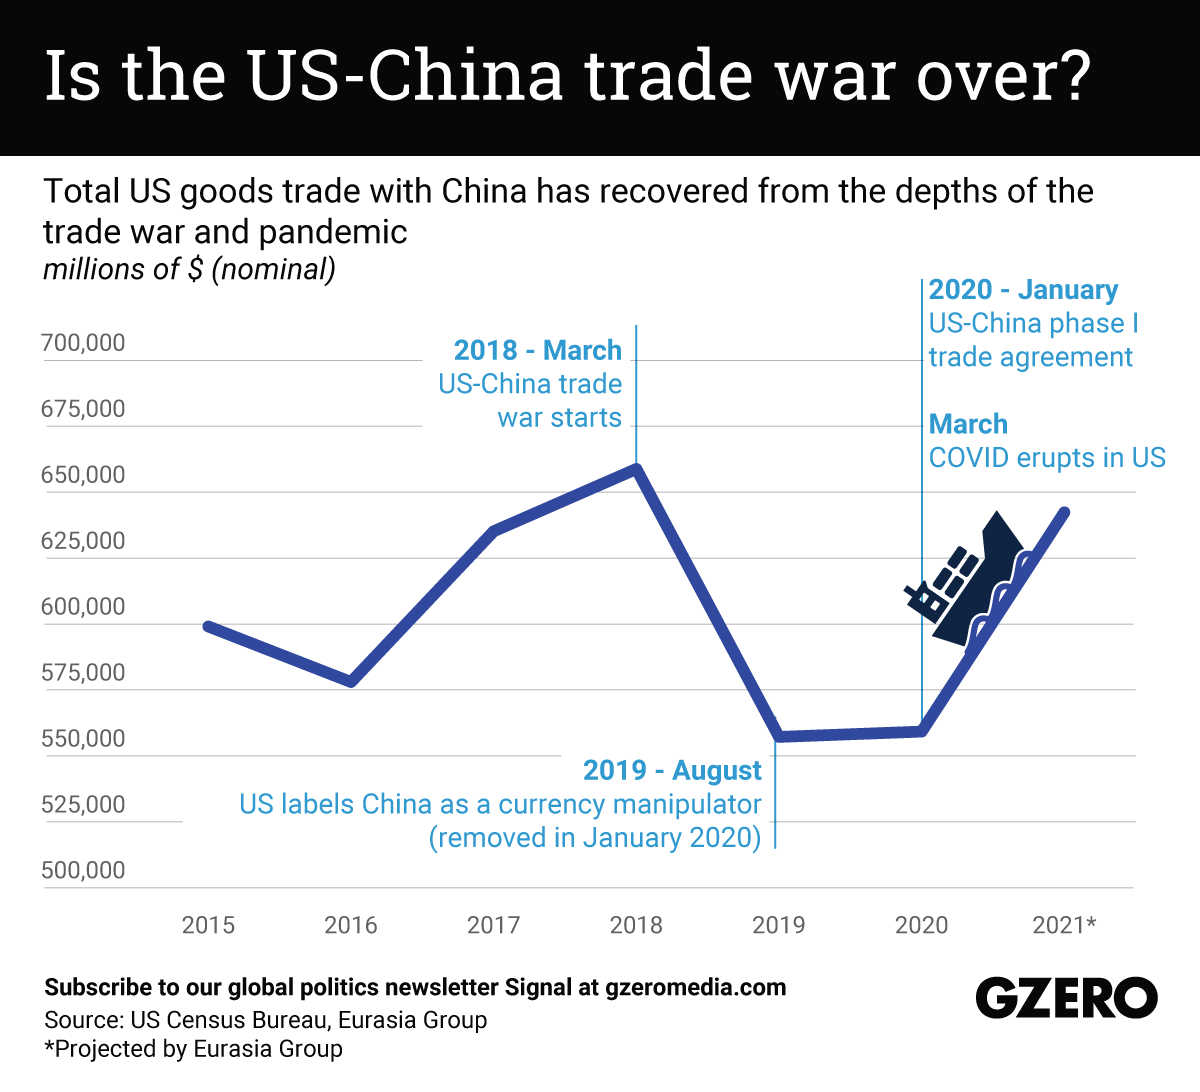 The Graphic Truth: Is the US-China trade war over?